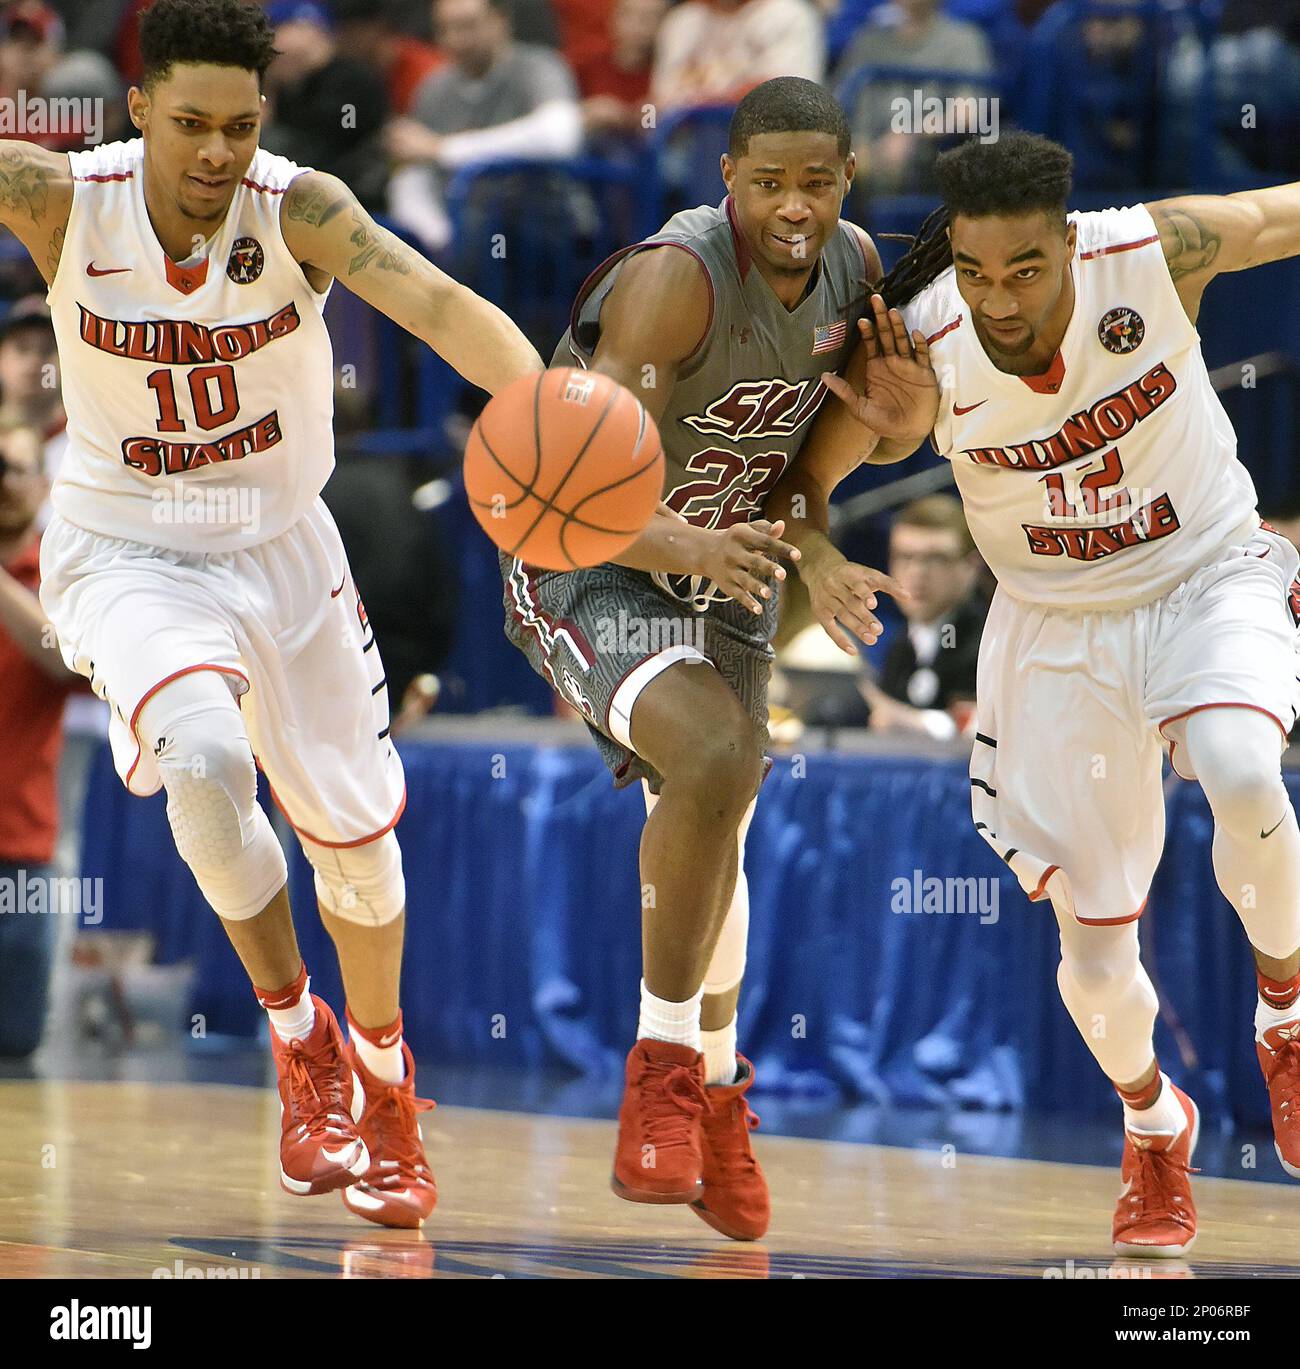 Where are they now?: Tony Wills - News - Illinois State